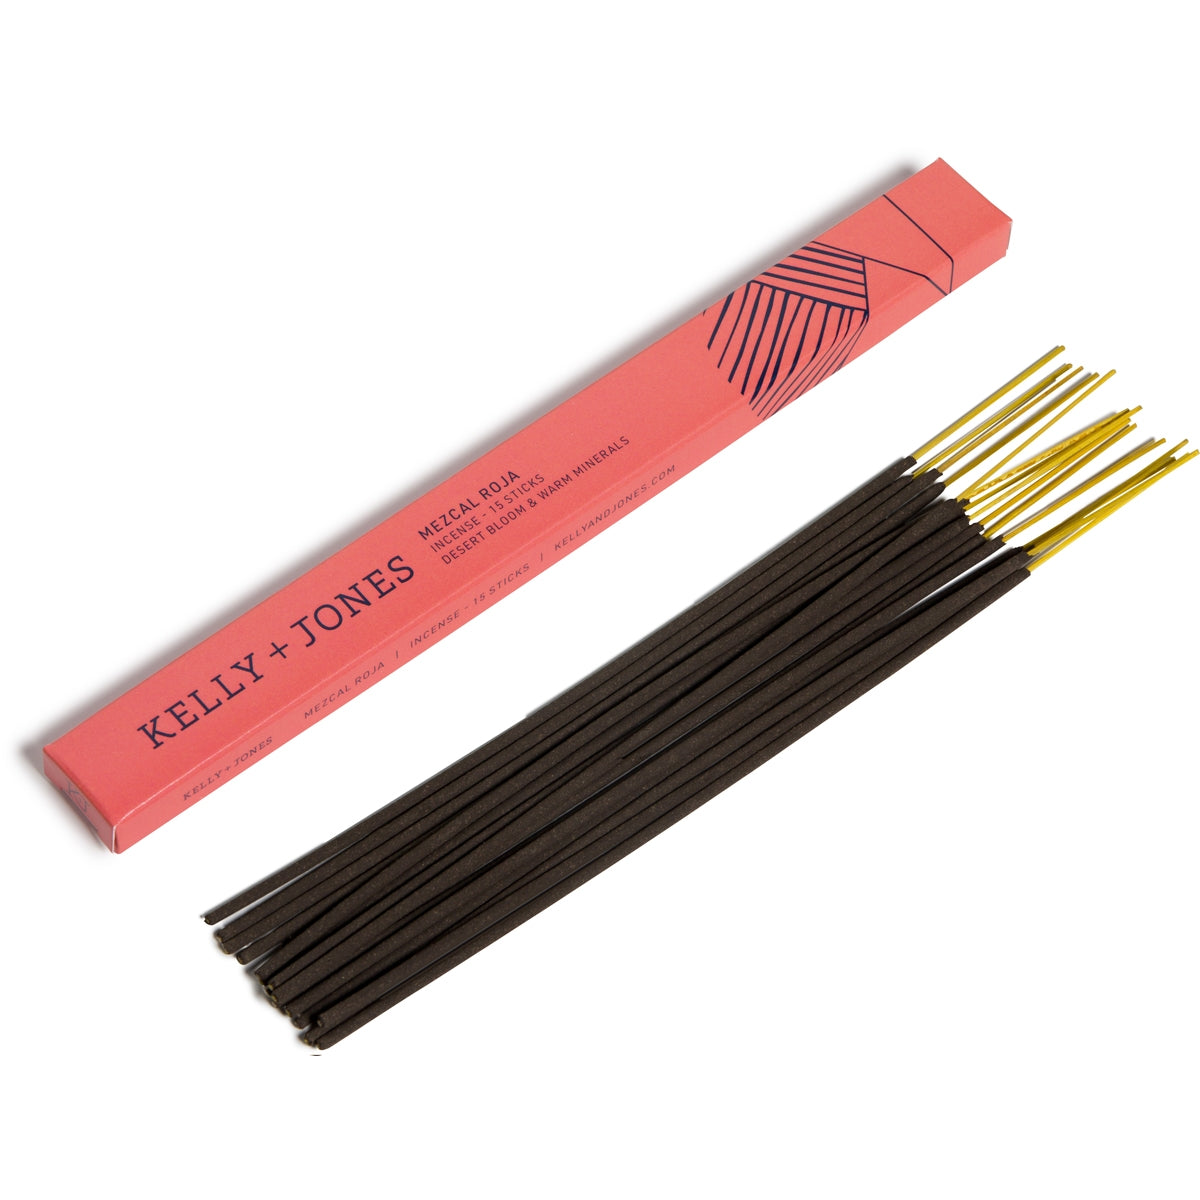 Journey into the agave fields of Mexico with Eau de Mezcal – fragrance inspired by the world’s most enrapturing spirit. A box of 15 hand-infused, 10” inch charcoal incense sticks made with pure essential oils.